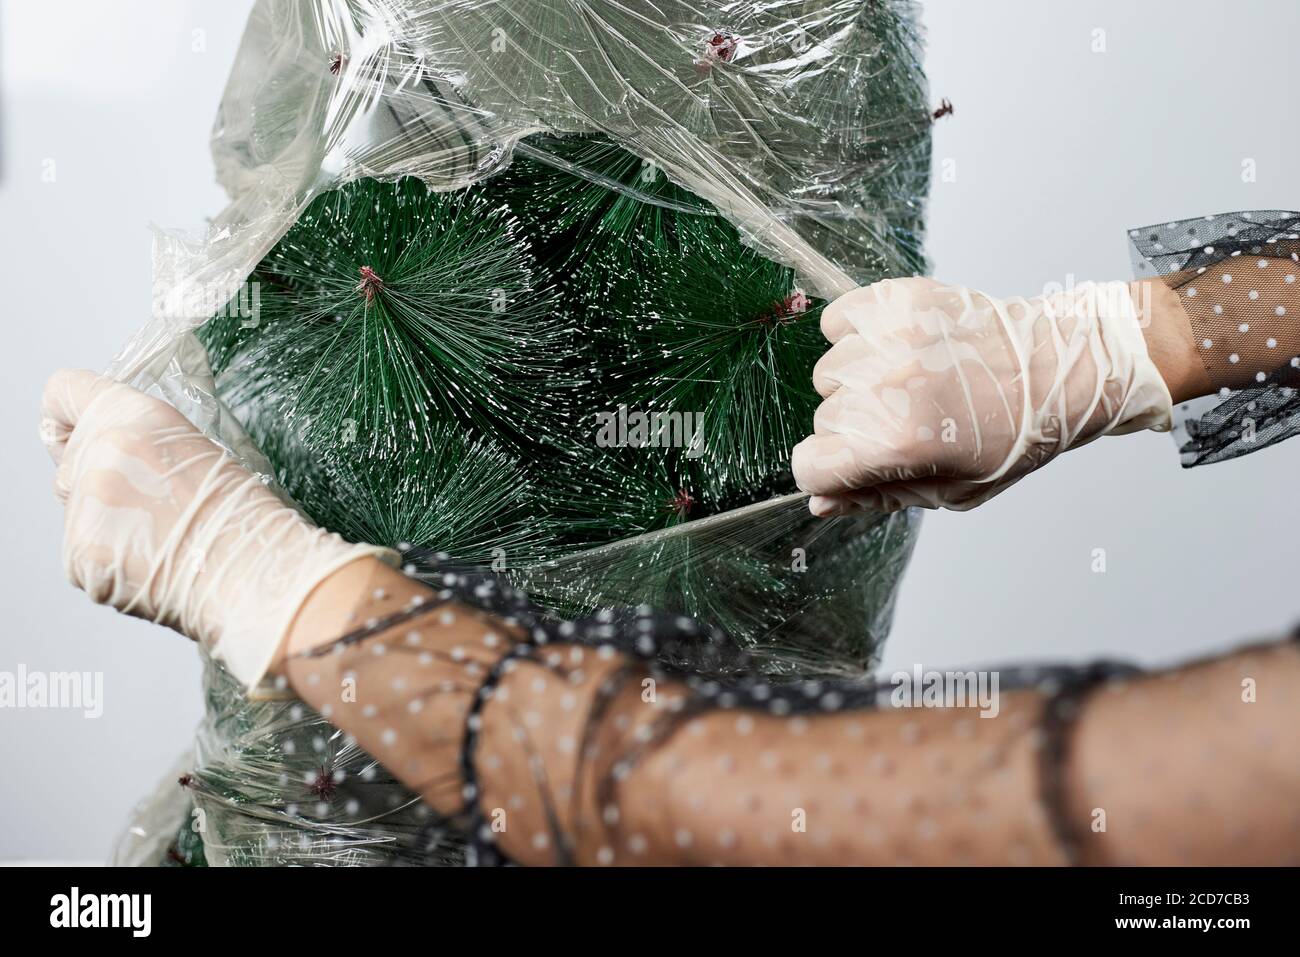 https://c8.alamy.com/comp/2CD7CB3/plastic-wrapped-christmas-tree-woman-in-medical-gloves-cutting-and-tearing-saran-wrap-re-opening-xmas-holidays-after-covid-19-quarantine-2CD7CB3.jpg